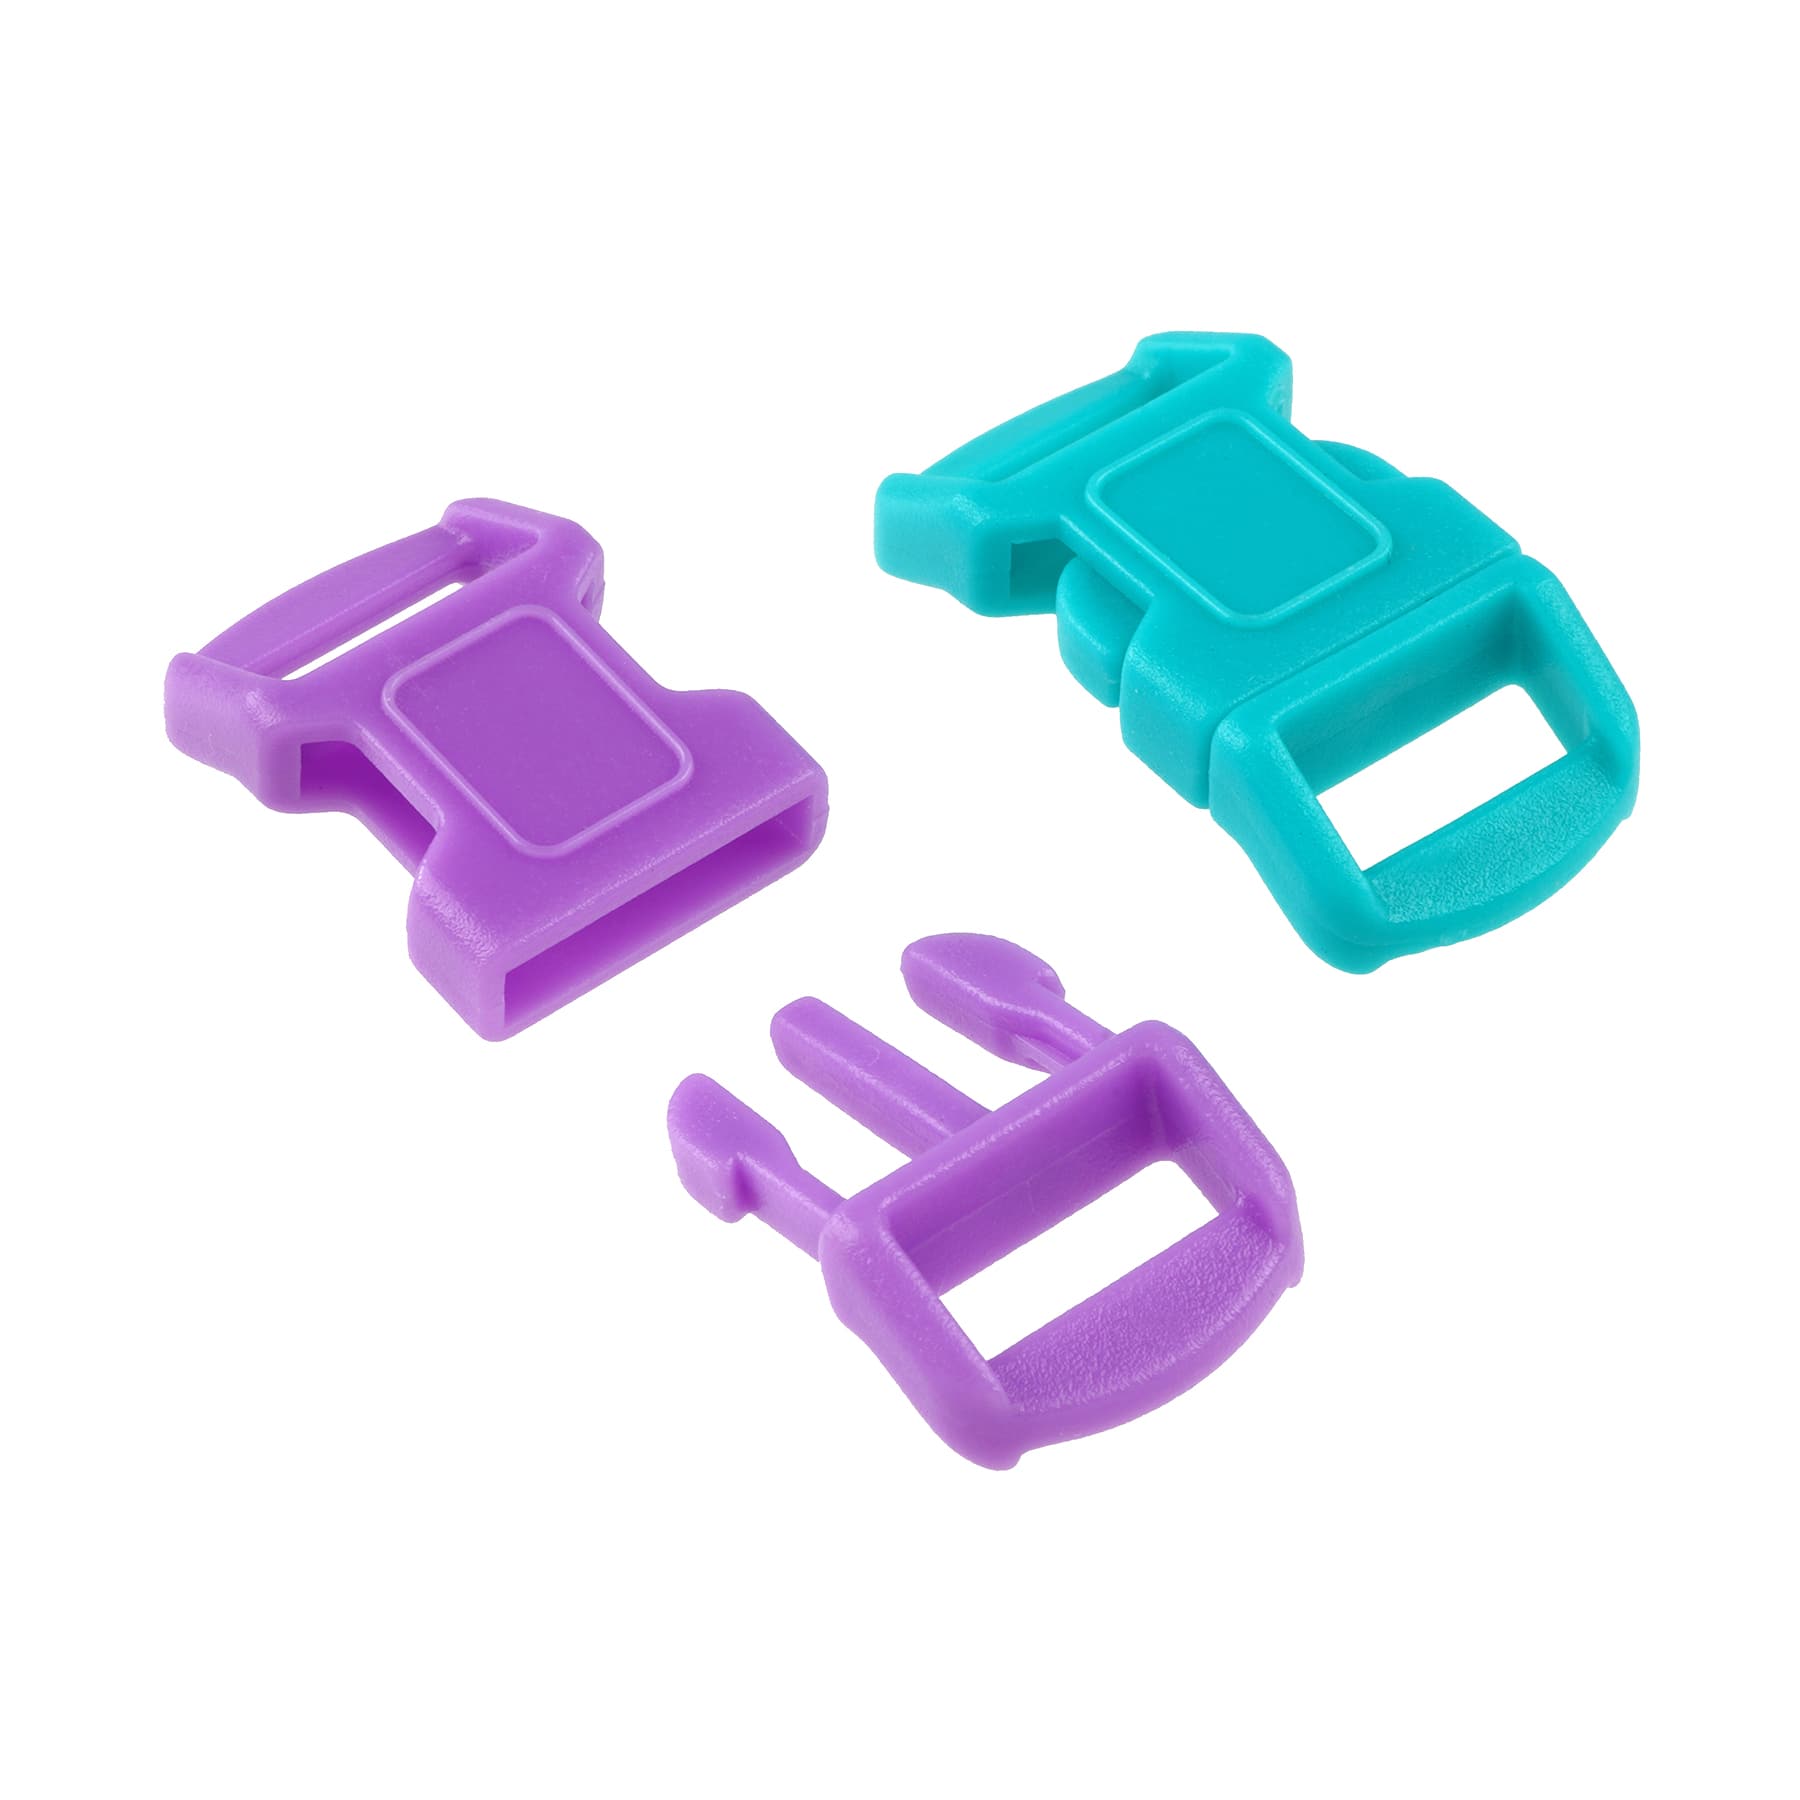 12 Packs: 8ct. (96 total) Plastic Paracord Buckles by Creatology™